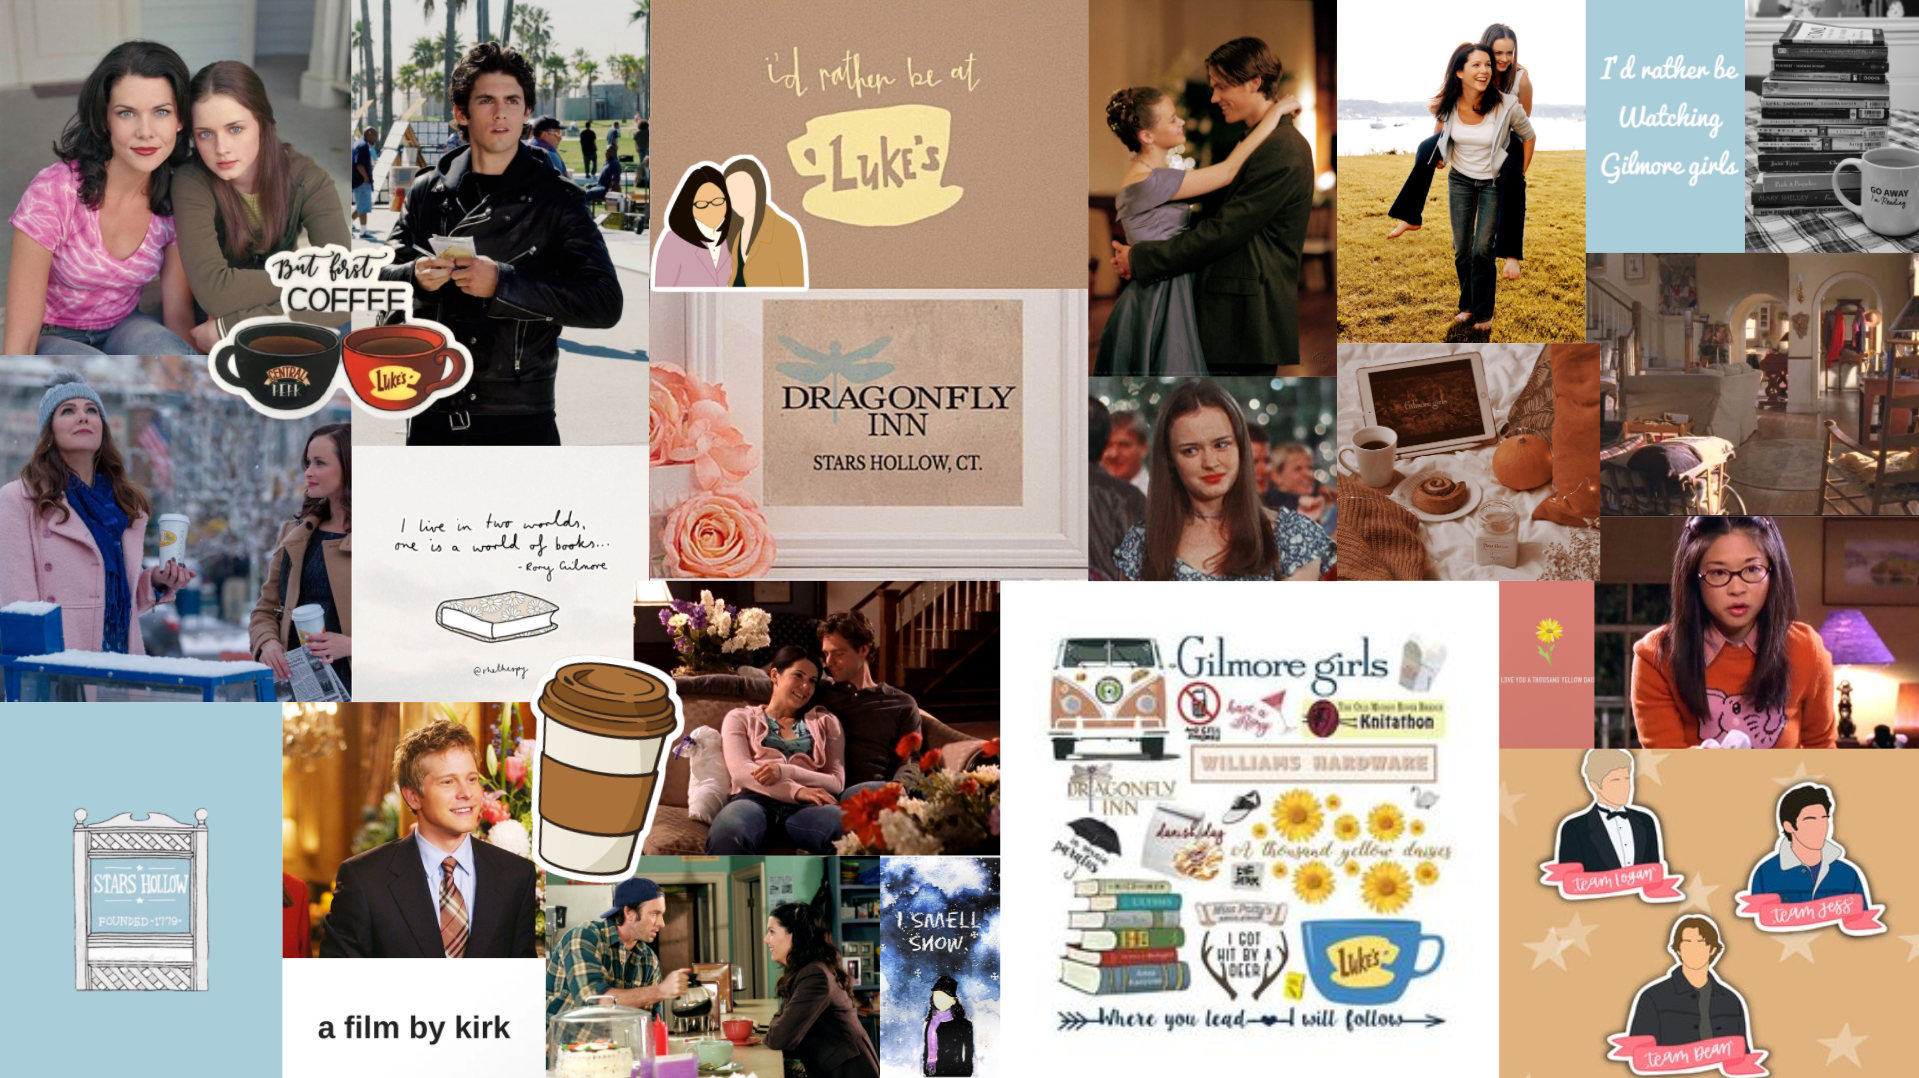 Free download Gilmore Girls Wallpaper for Desktop Cell Phone The Literary  1920x1080 for your Desktop Mobile  Tablet  Explore 24 Gilmore Girls  Desktop Wallpapers  Happy Gilmore Wallpaper Linux Girls Wallpaper